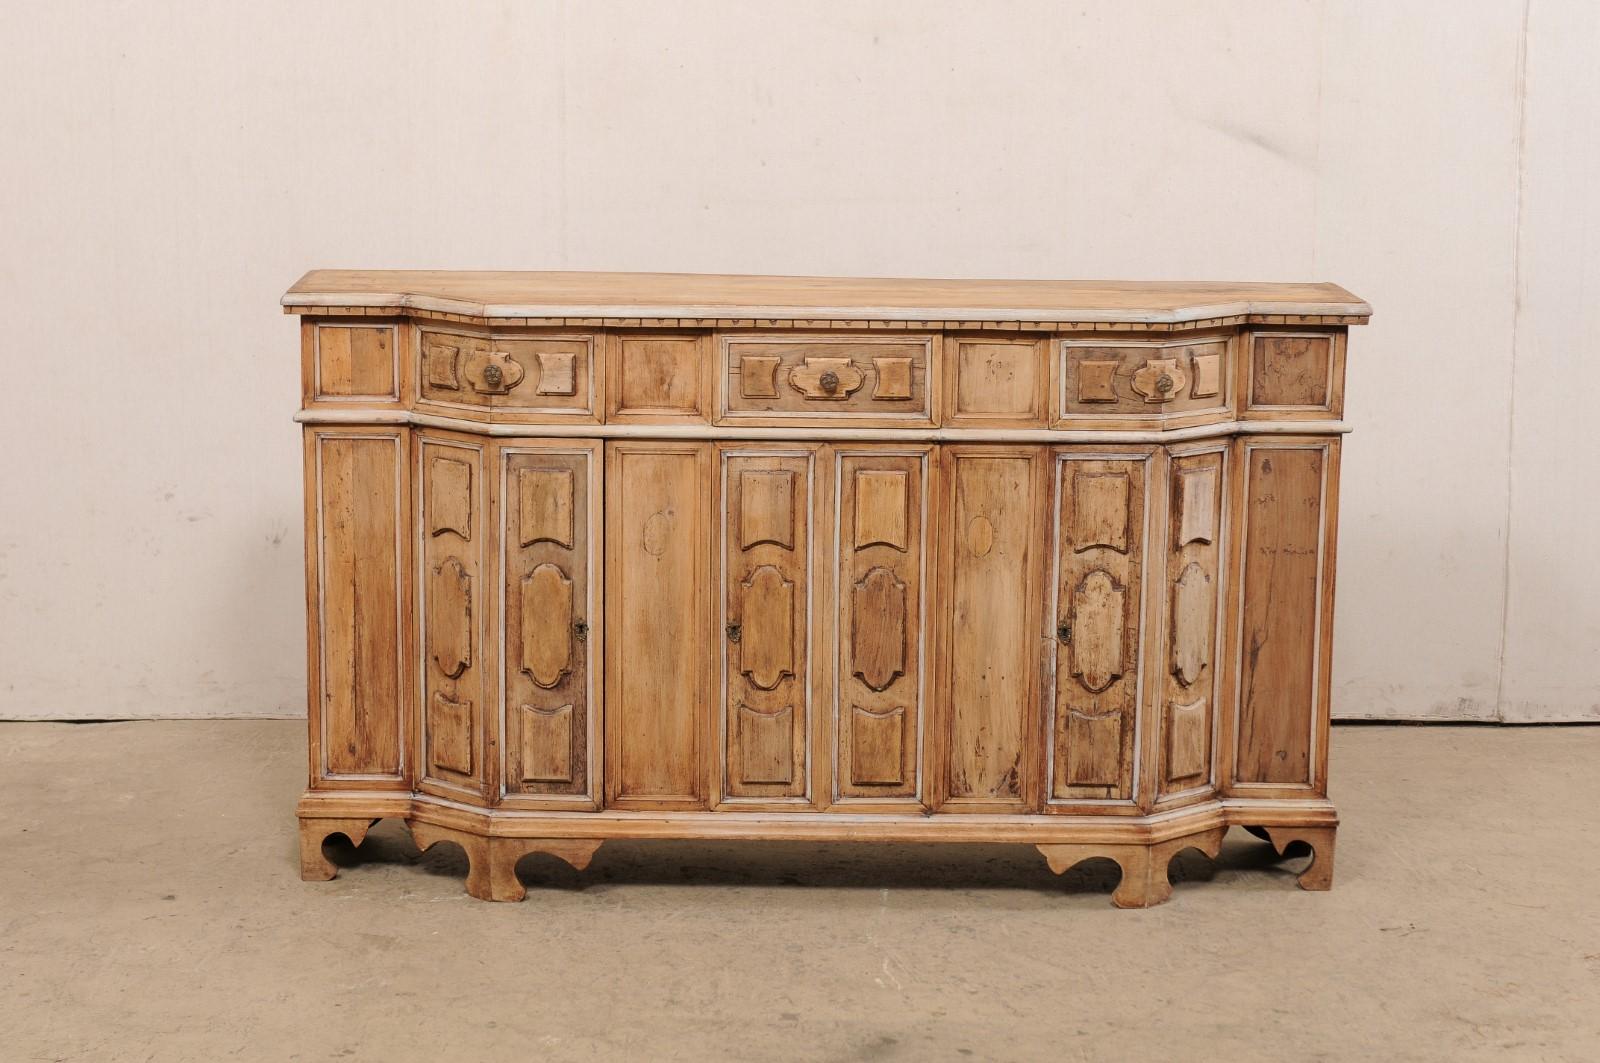 Italian 19th C. Nicely-Carved Wood Break-Front Credenza 'with Slender Depth!' 6